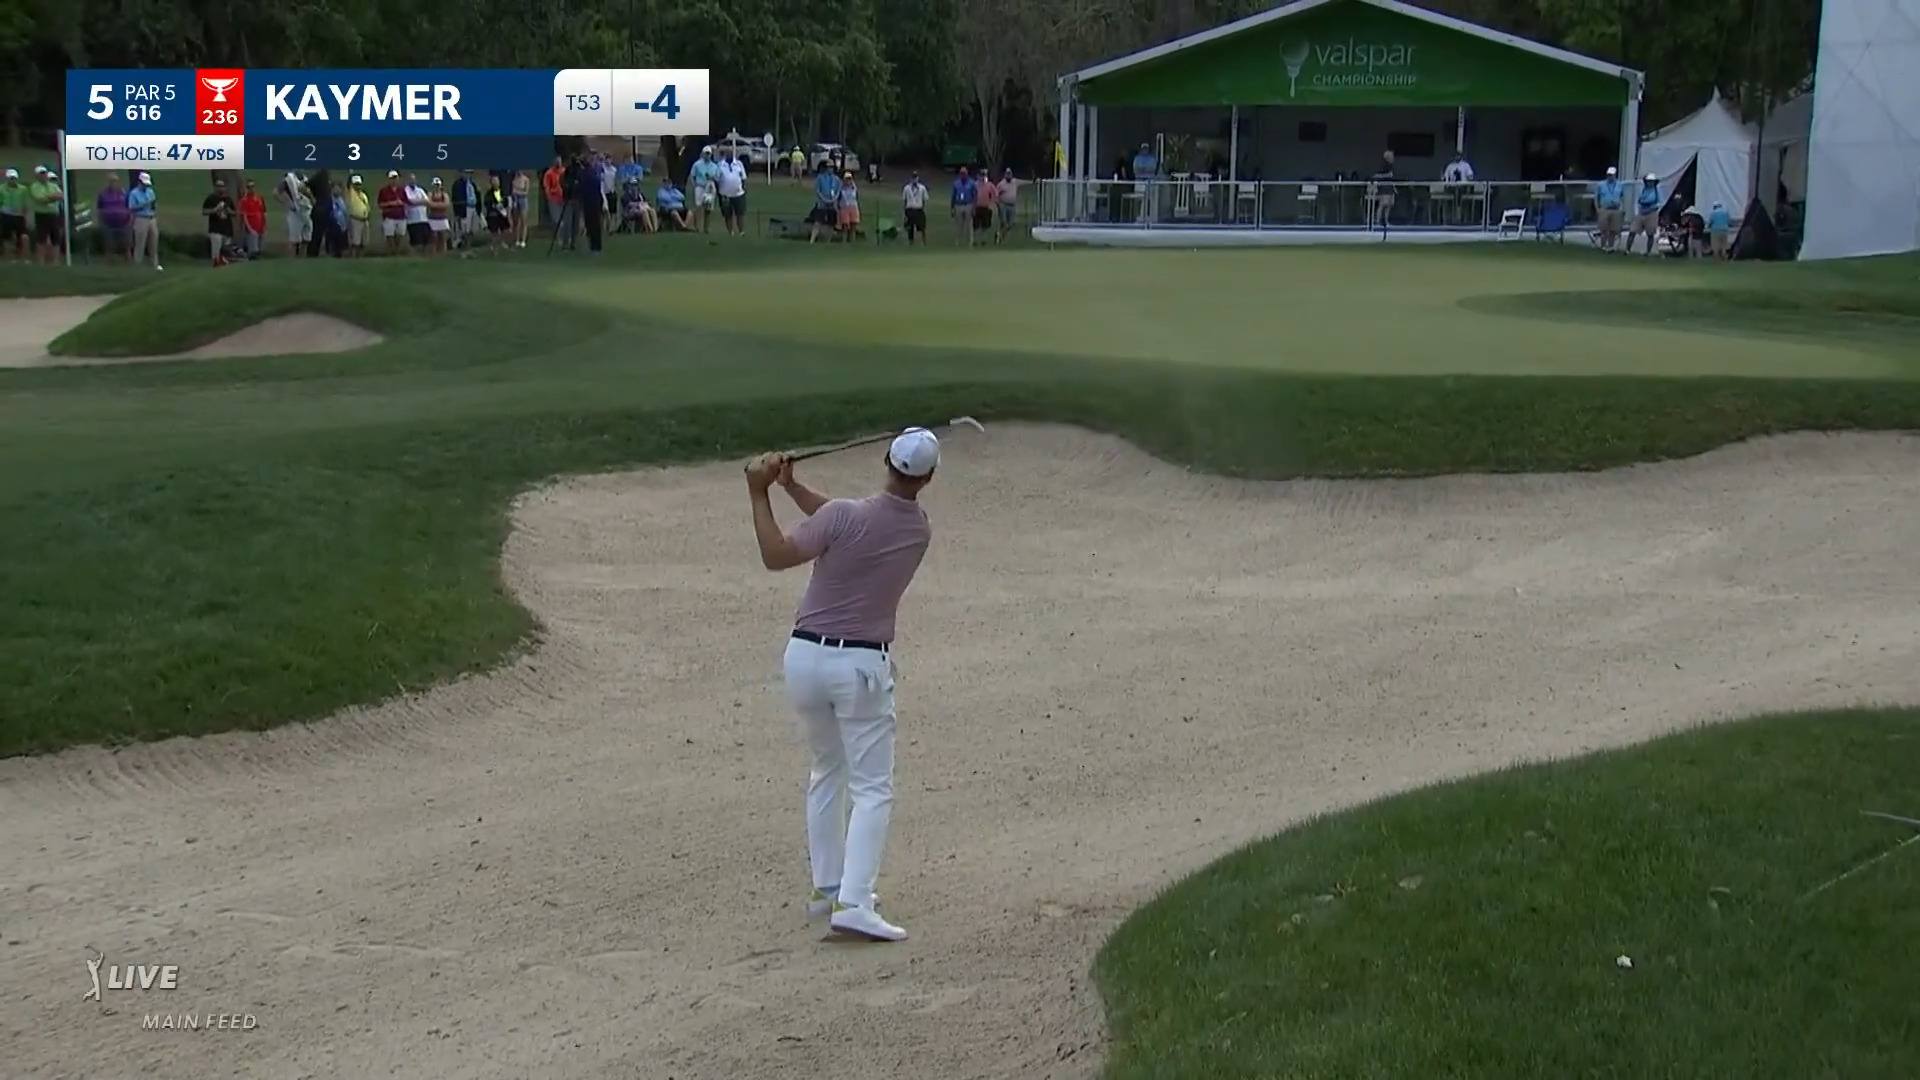 Martin Kaymers bunker play leads to birdie at Valspar